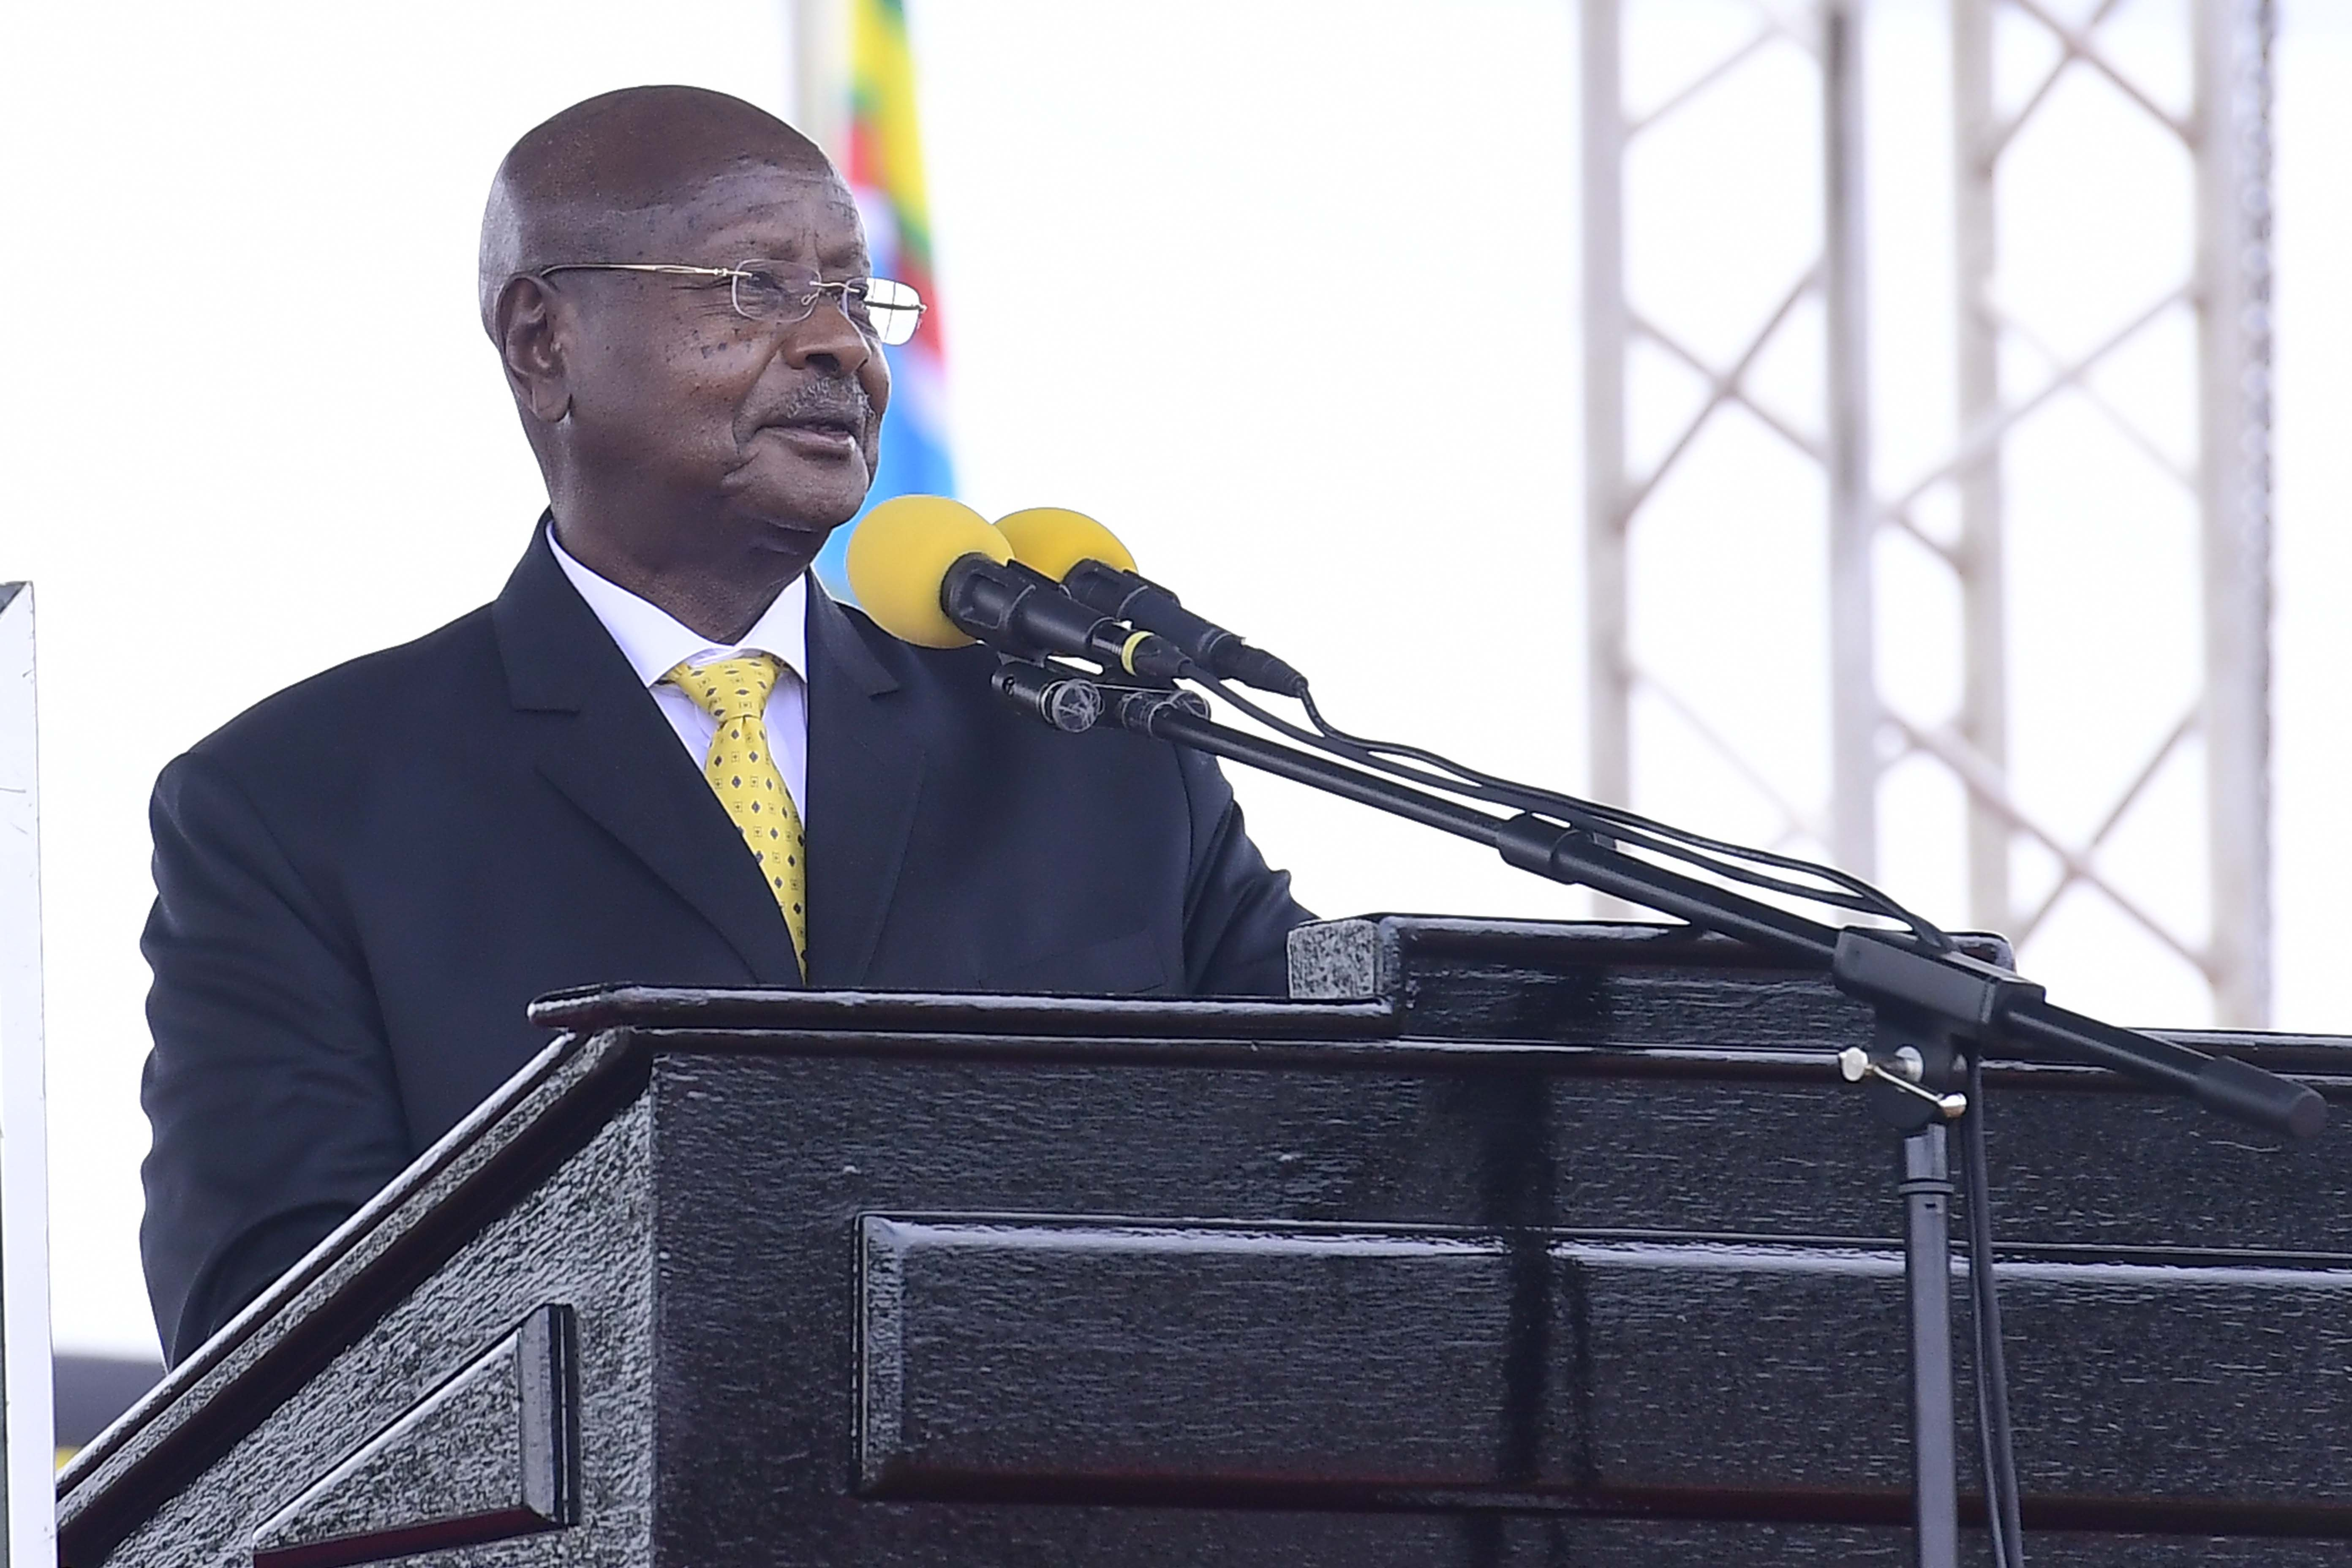 Uganda's President Yoweri Museveni addresses delegates during his swearing-in ceremony for the sixth elective term at the Kololo Independence Grounds in Kampala, Uganda May 12, 2021. Presidential Press Service/Handout via REUTERS  